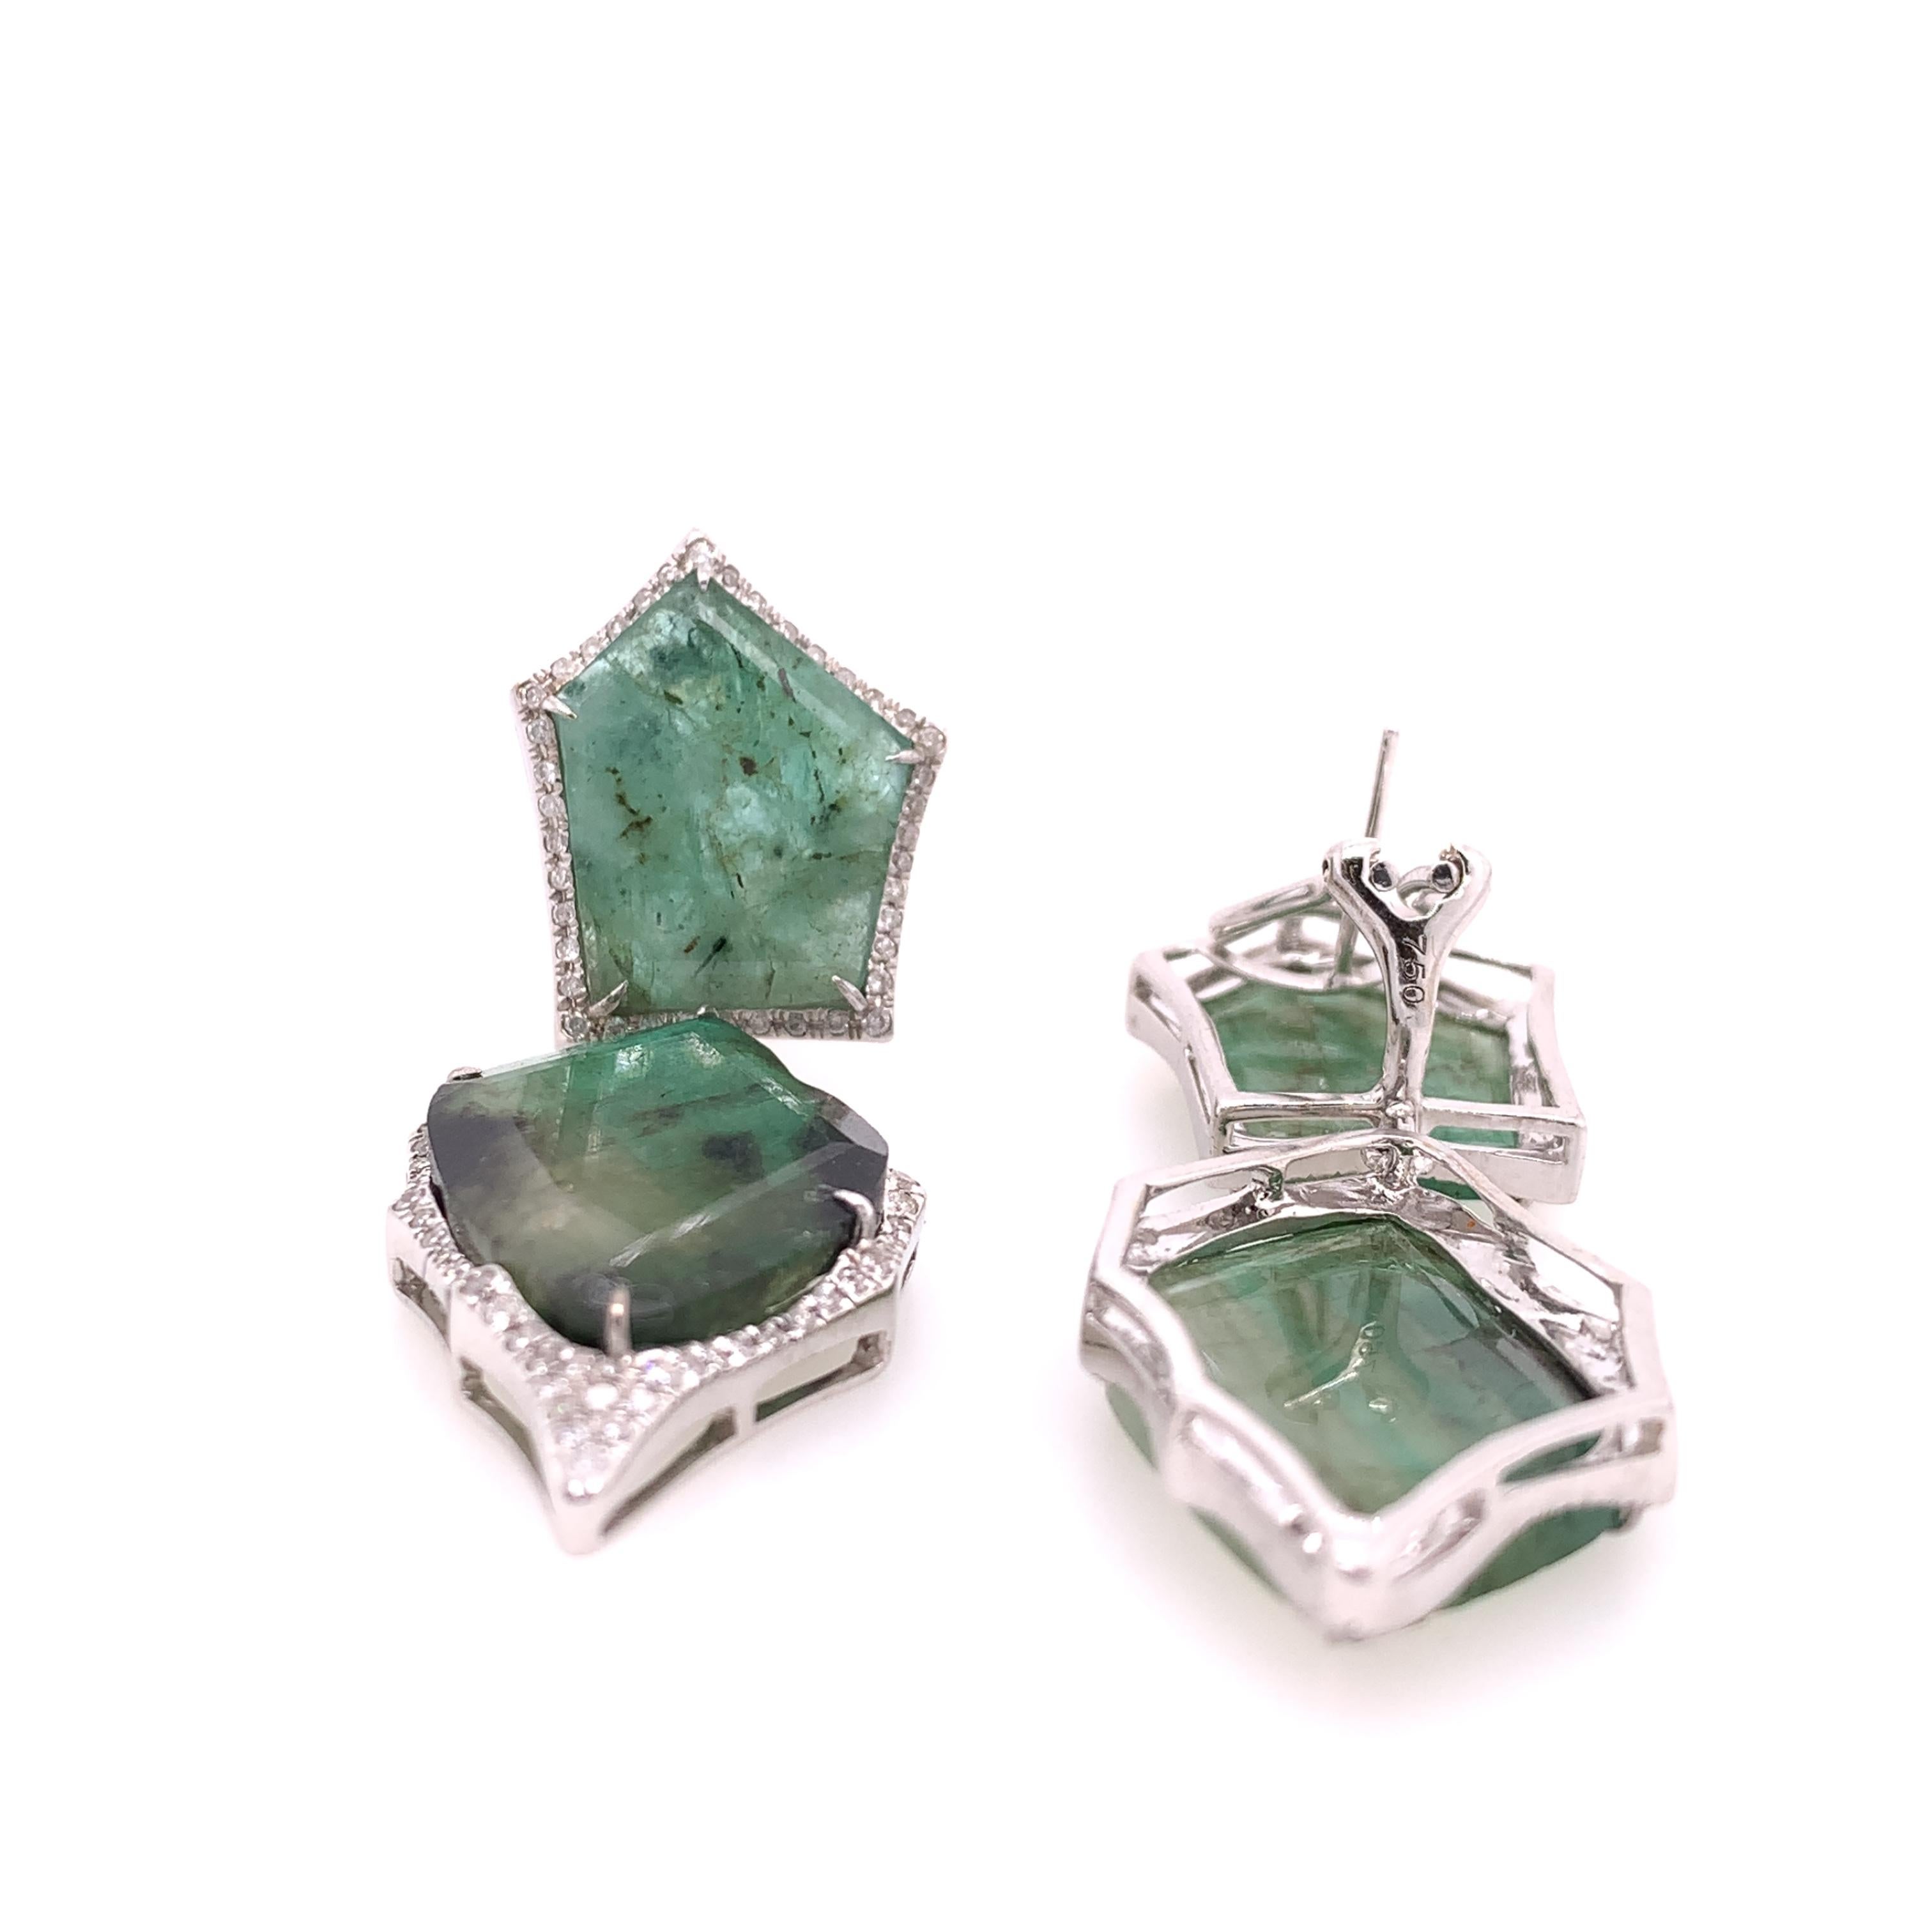 Lillipad Collection

This pair of stunning statement earrings features totaling Emerald gemstones surrounded by a gallery of diamond accents and set on 18k white gold, which makes this piece a timeless favor for any woman.

Emerald:30.67ct total